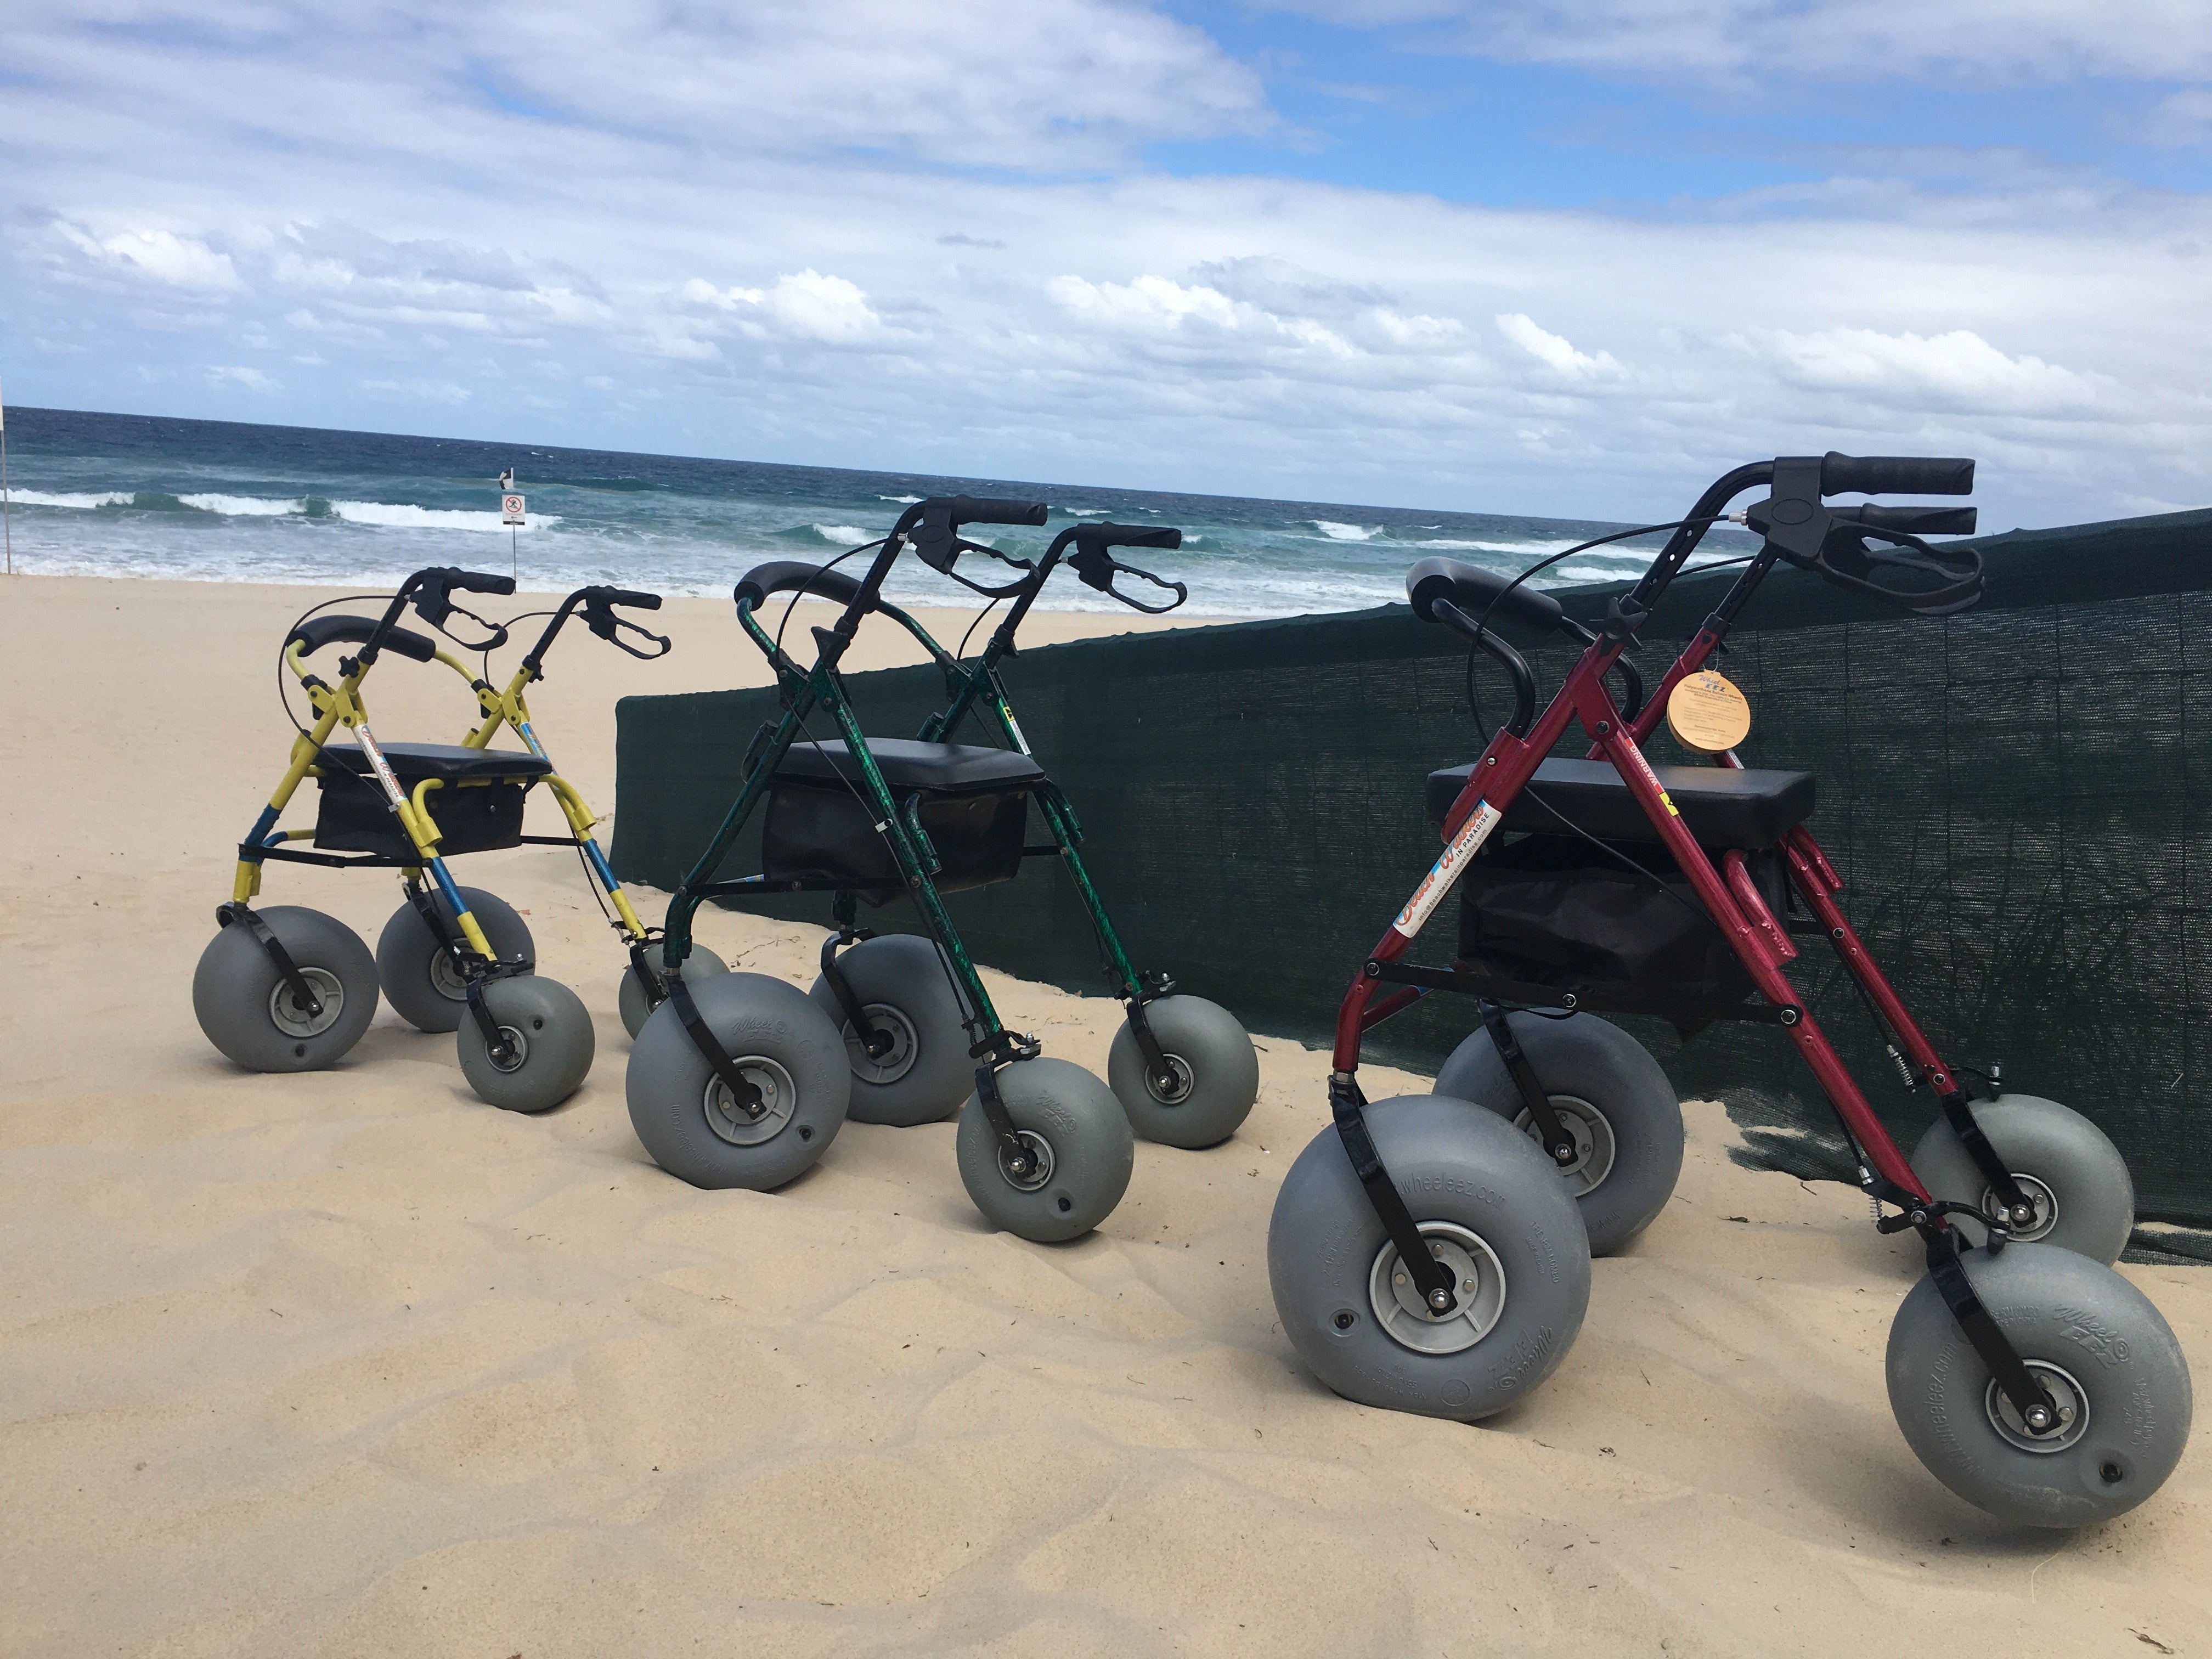 Our S Line Beach Walkers start at $1,395.00